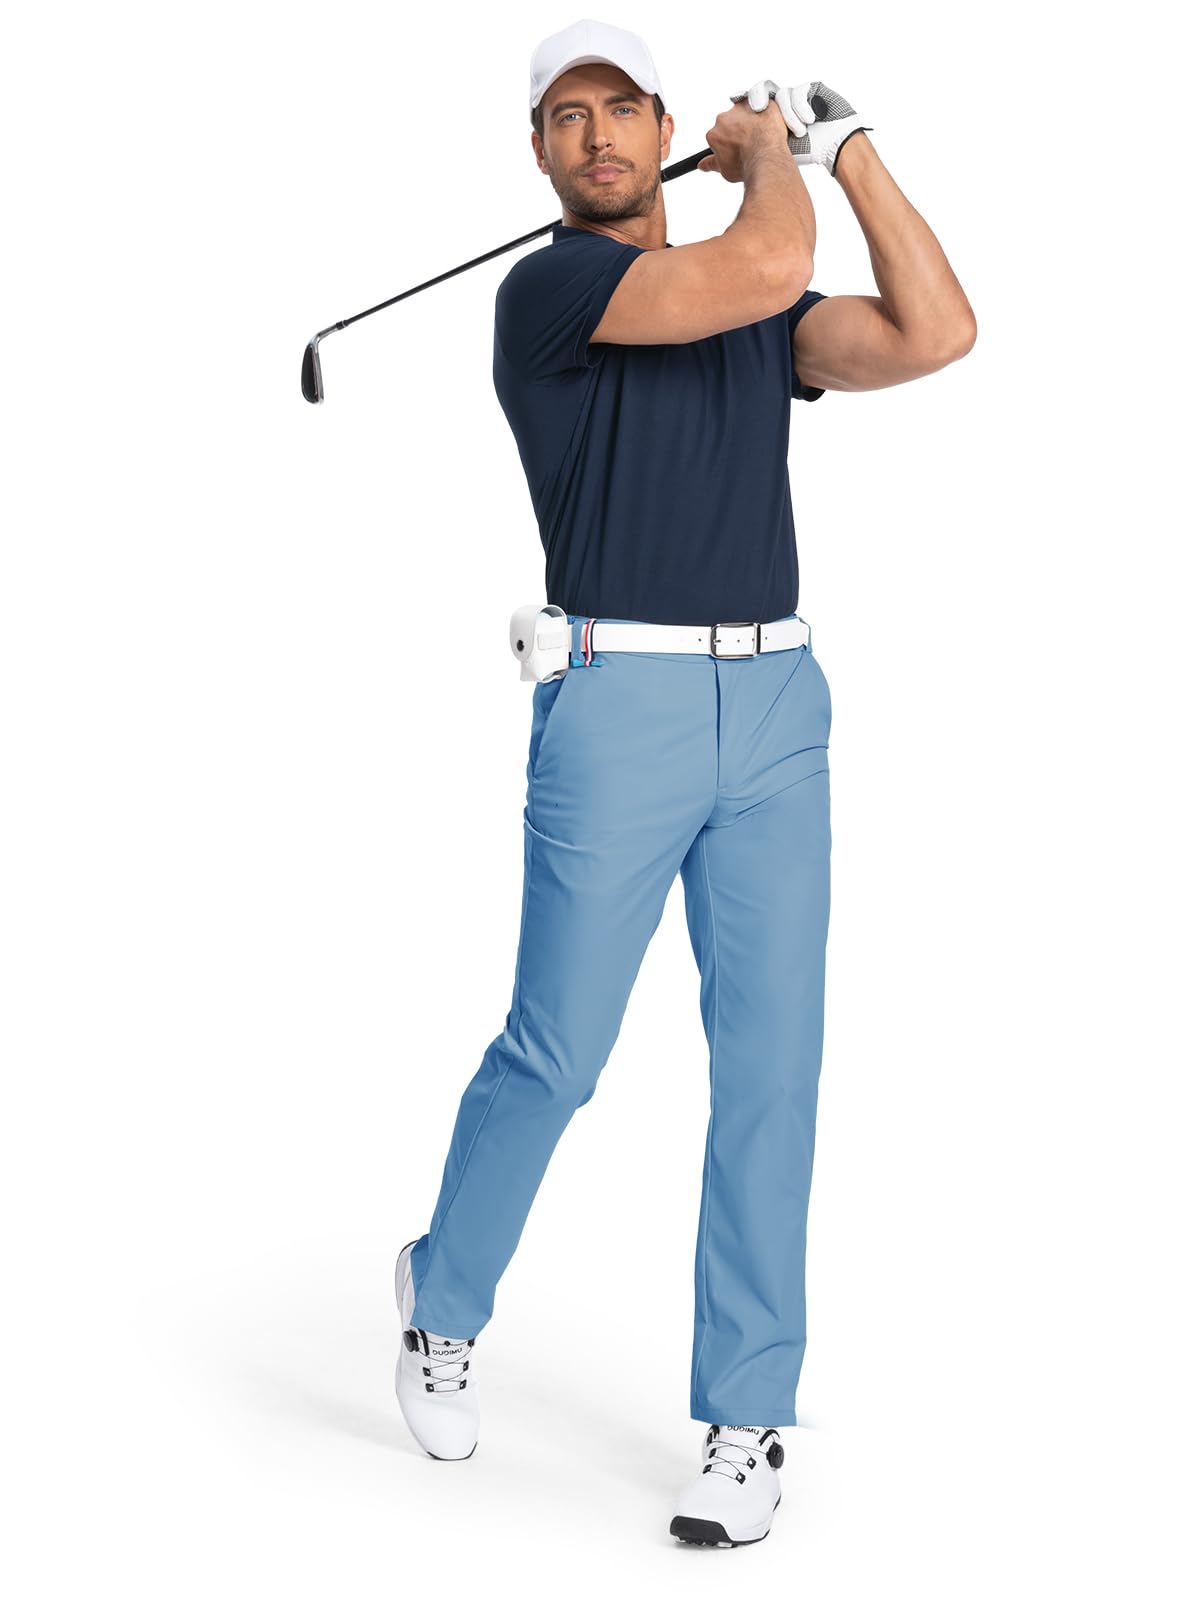 Men's Golf Pants Classic Fit Stretch Quick Dry Lightweight Dress Work Casual Outdoor Comfy Trousers with Pockets